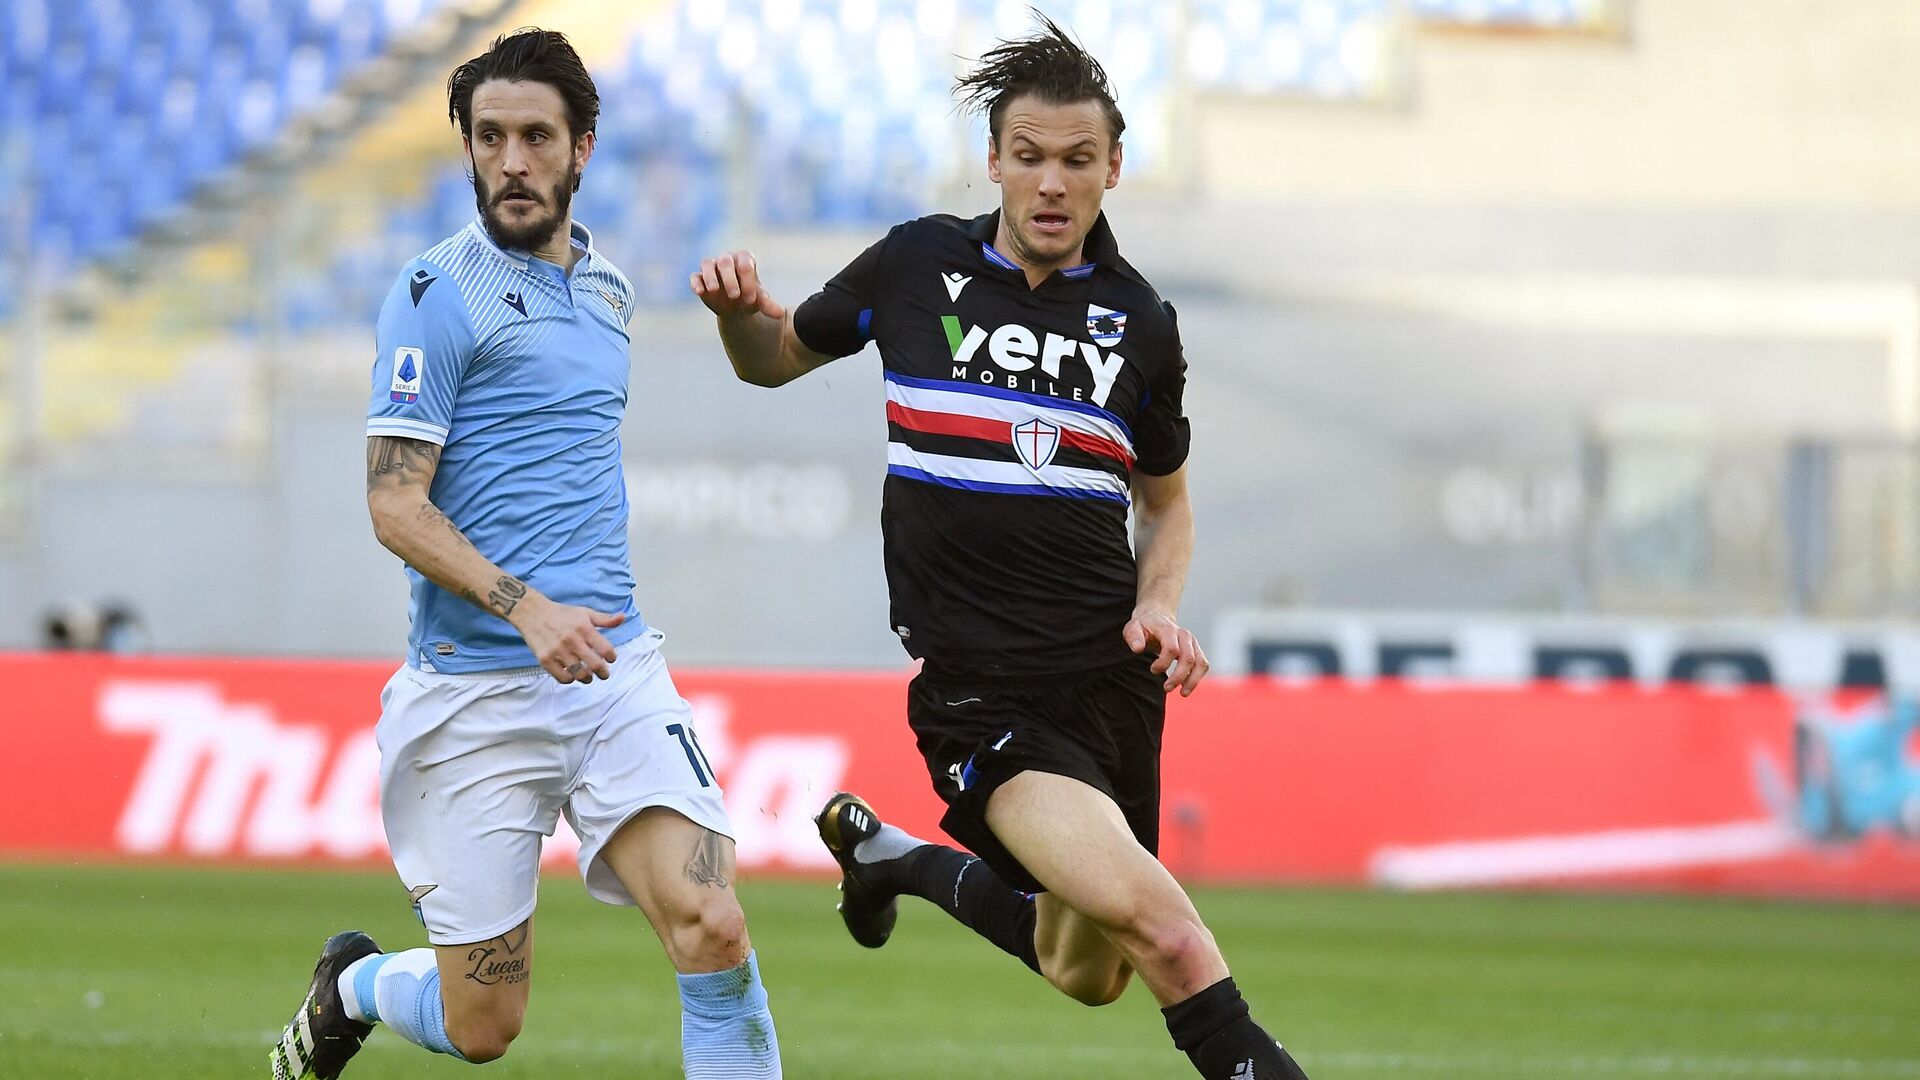 Lazio's Spanish midfielder Luis Alberto (L) fights for the ball with Sampdoria's Swedish midfielder Albin Ekdal during the Serie A football match between Lazio and Sampdoria on February 20, 2021 at the Olympic stadium in Rome. (Photo by Vincenzo PINTO / AFP) - РИА Новости, 1920, 20.02.2021